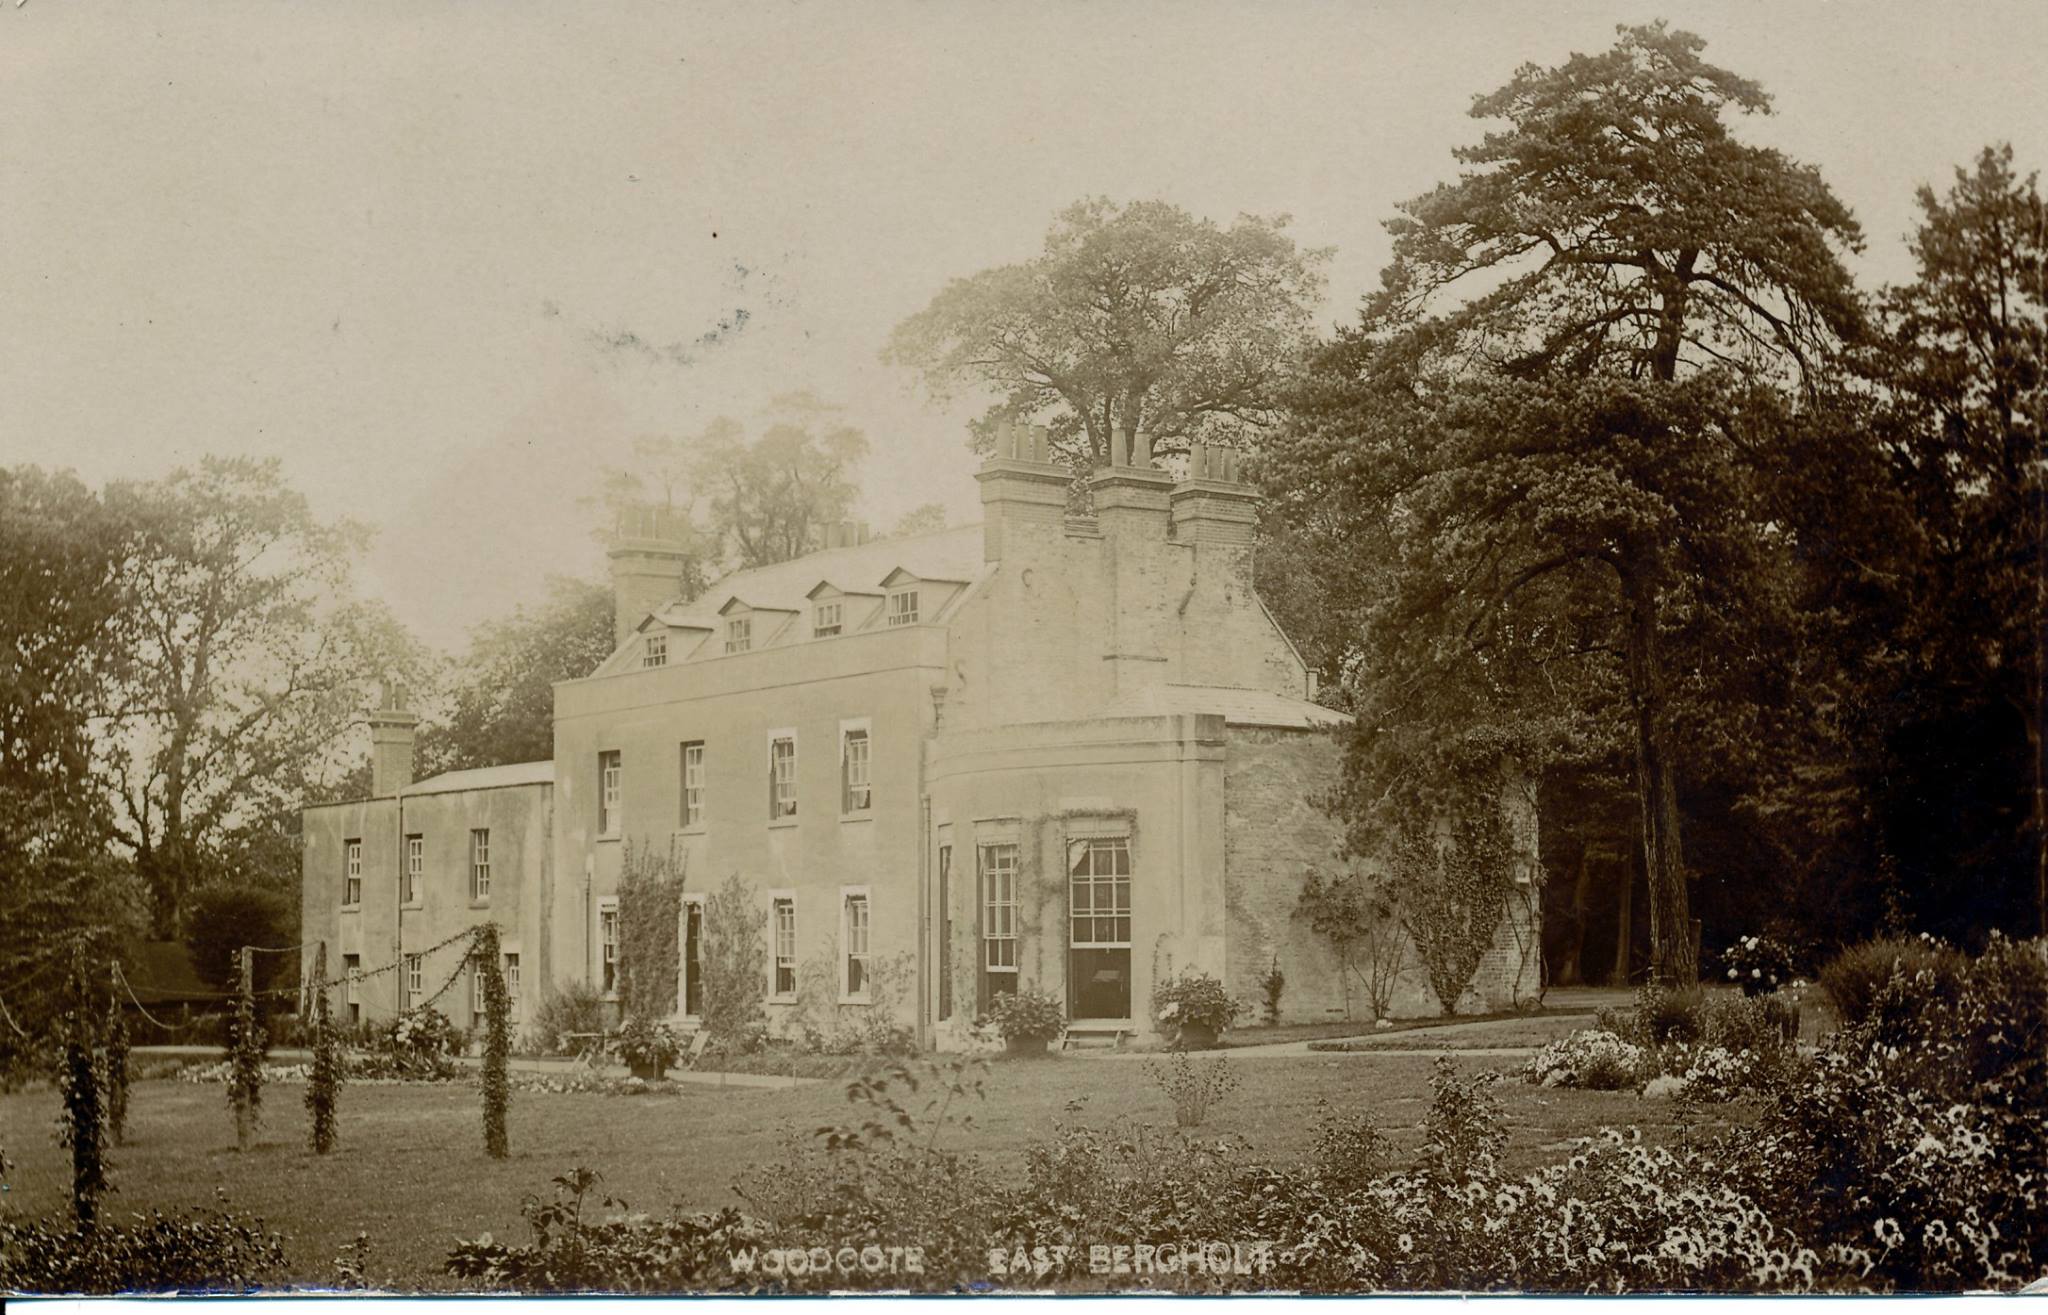 Woodcote (now called The Old Rectory) in the early 20th century<br>Author's collection